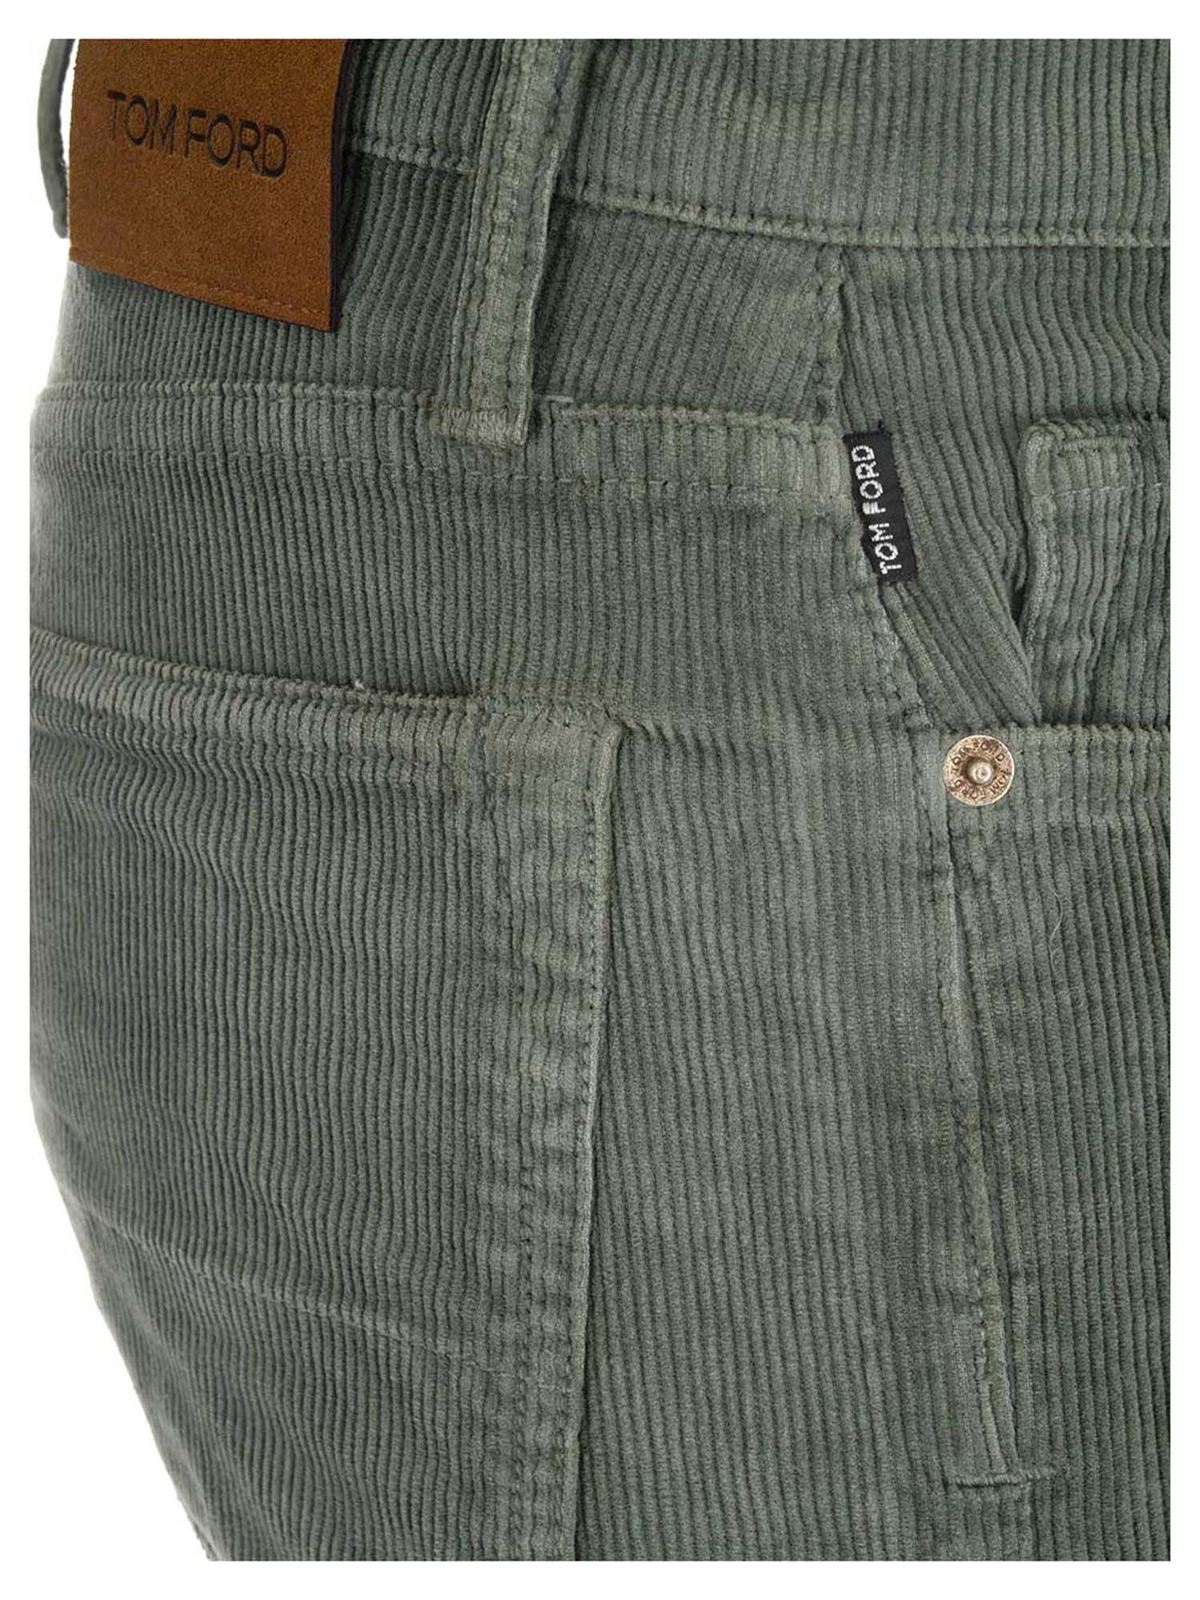 Straight leg jeans Tom Ford - Corduroy pants in green - BYJ39TFD001T04